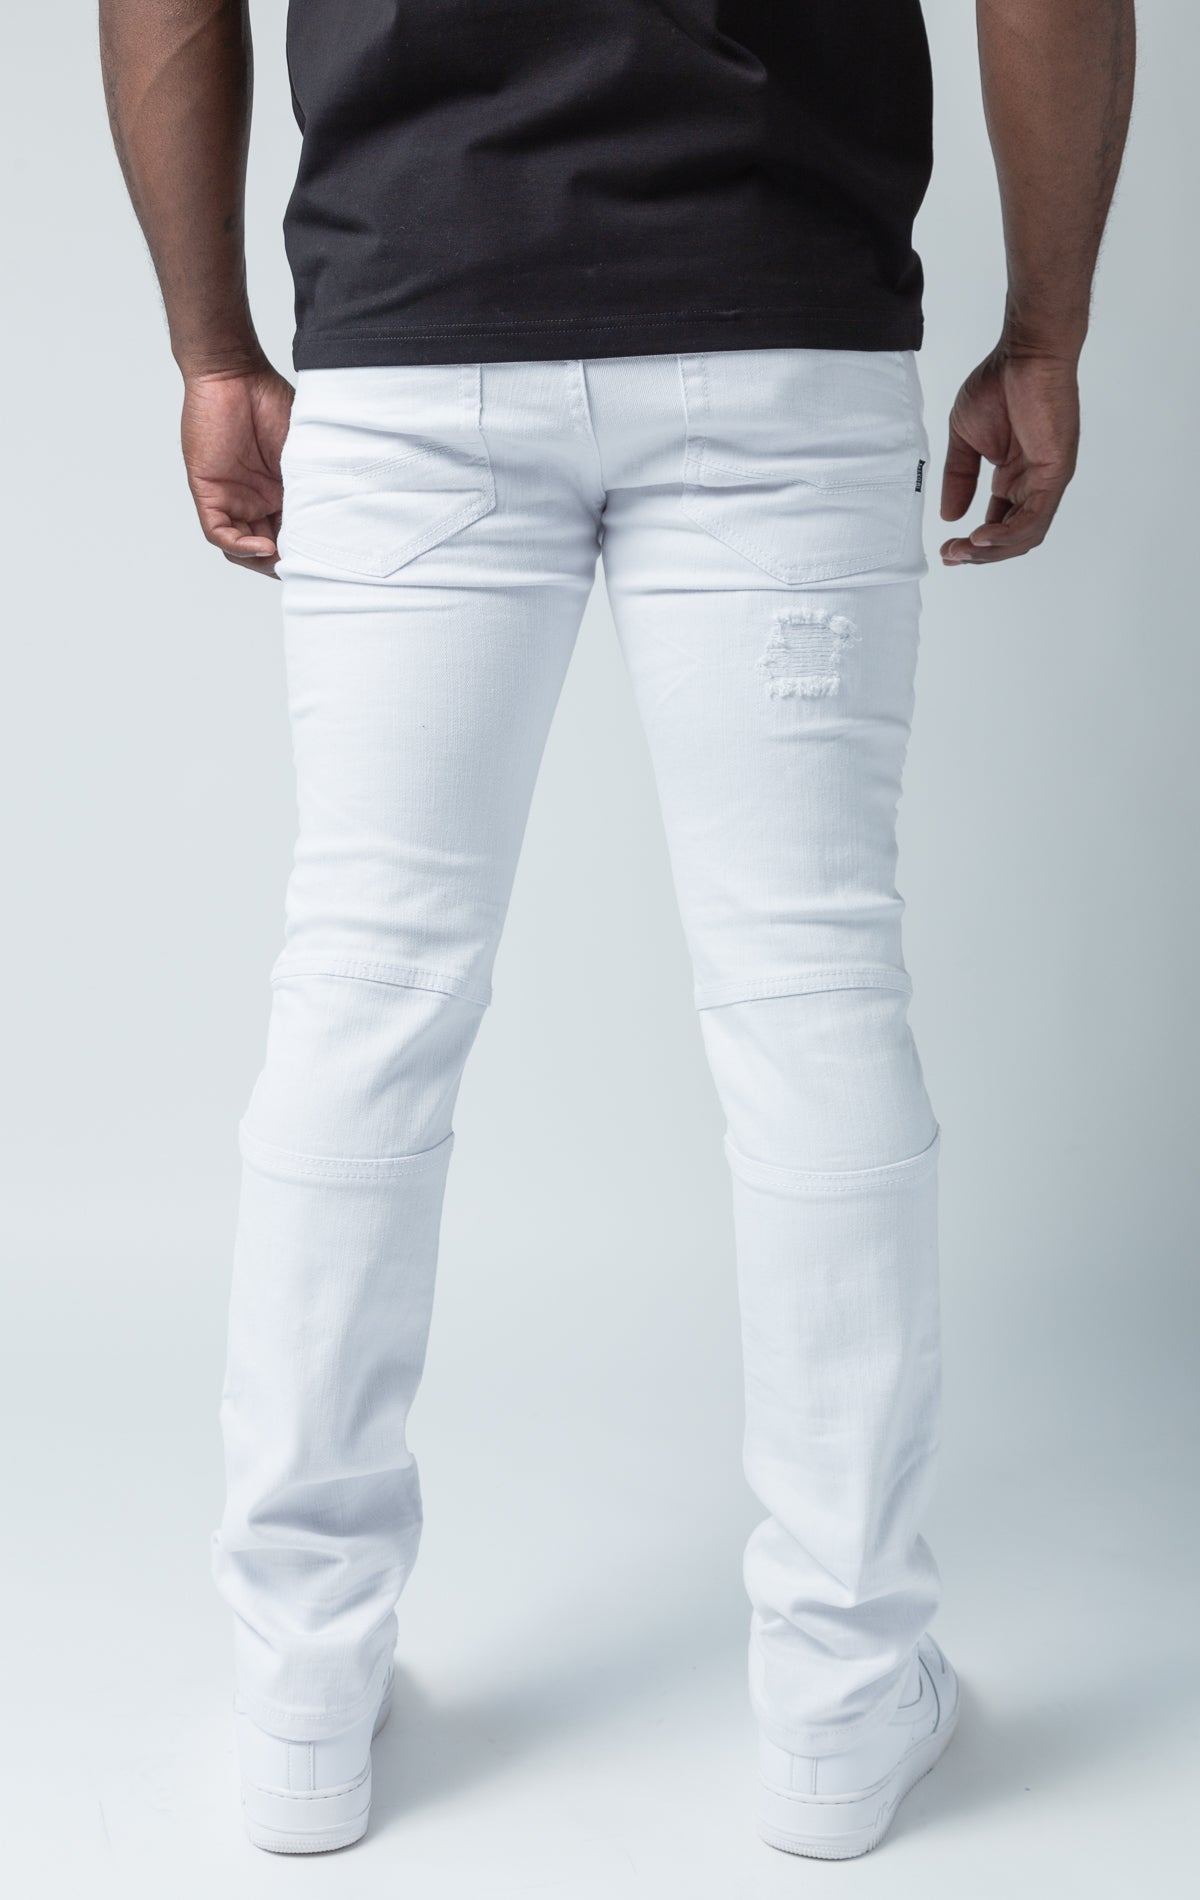 White pants with rip and repair design and slim fit